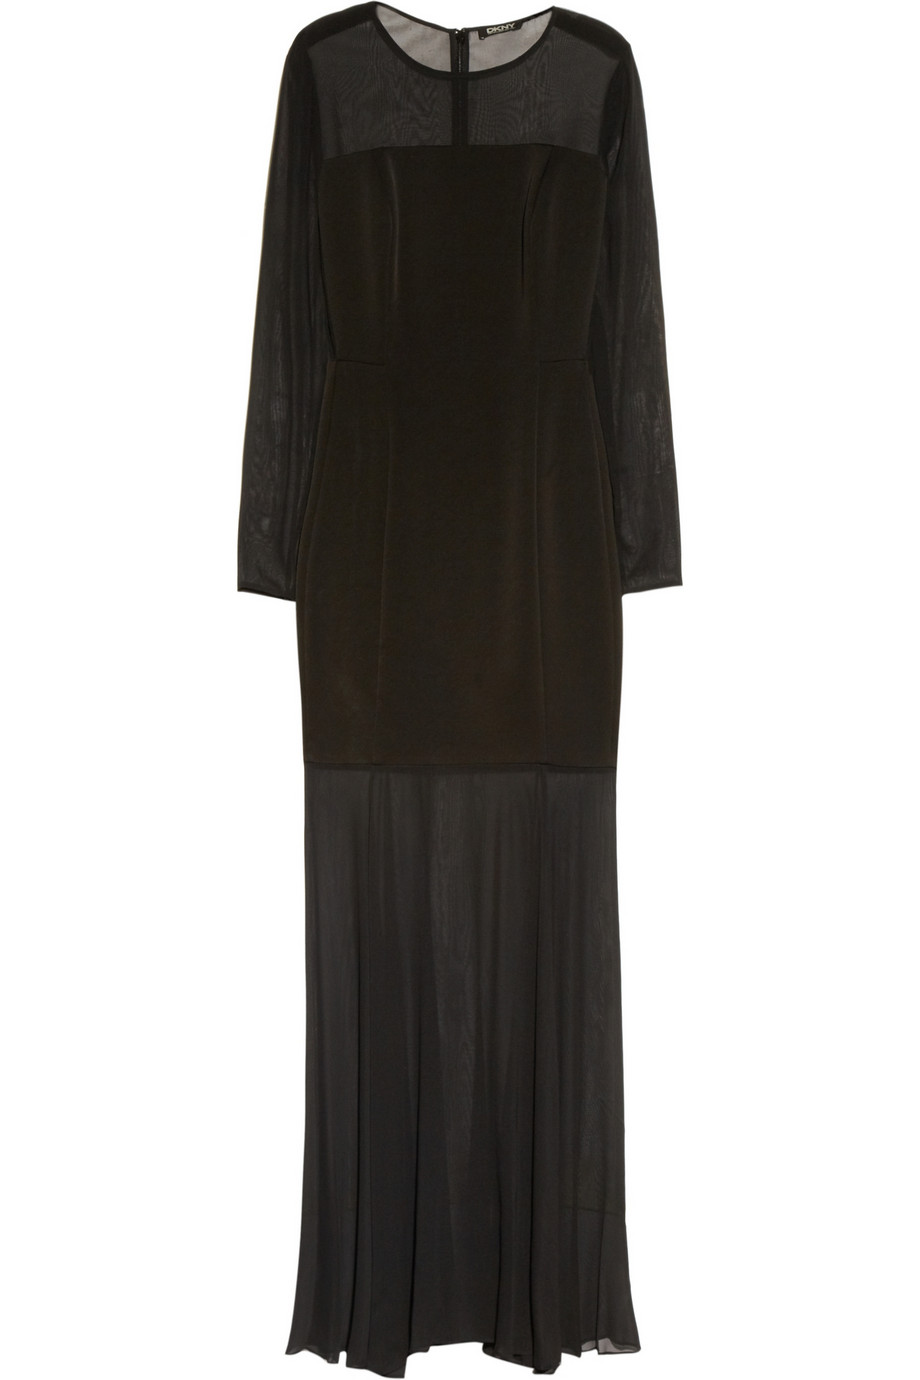 DKNY Stretchsilk Chiffon and Crepe Gown in Black - Lyst